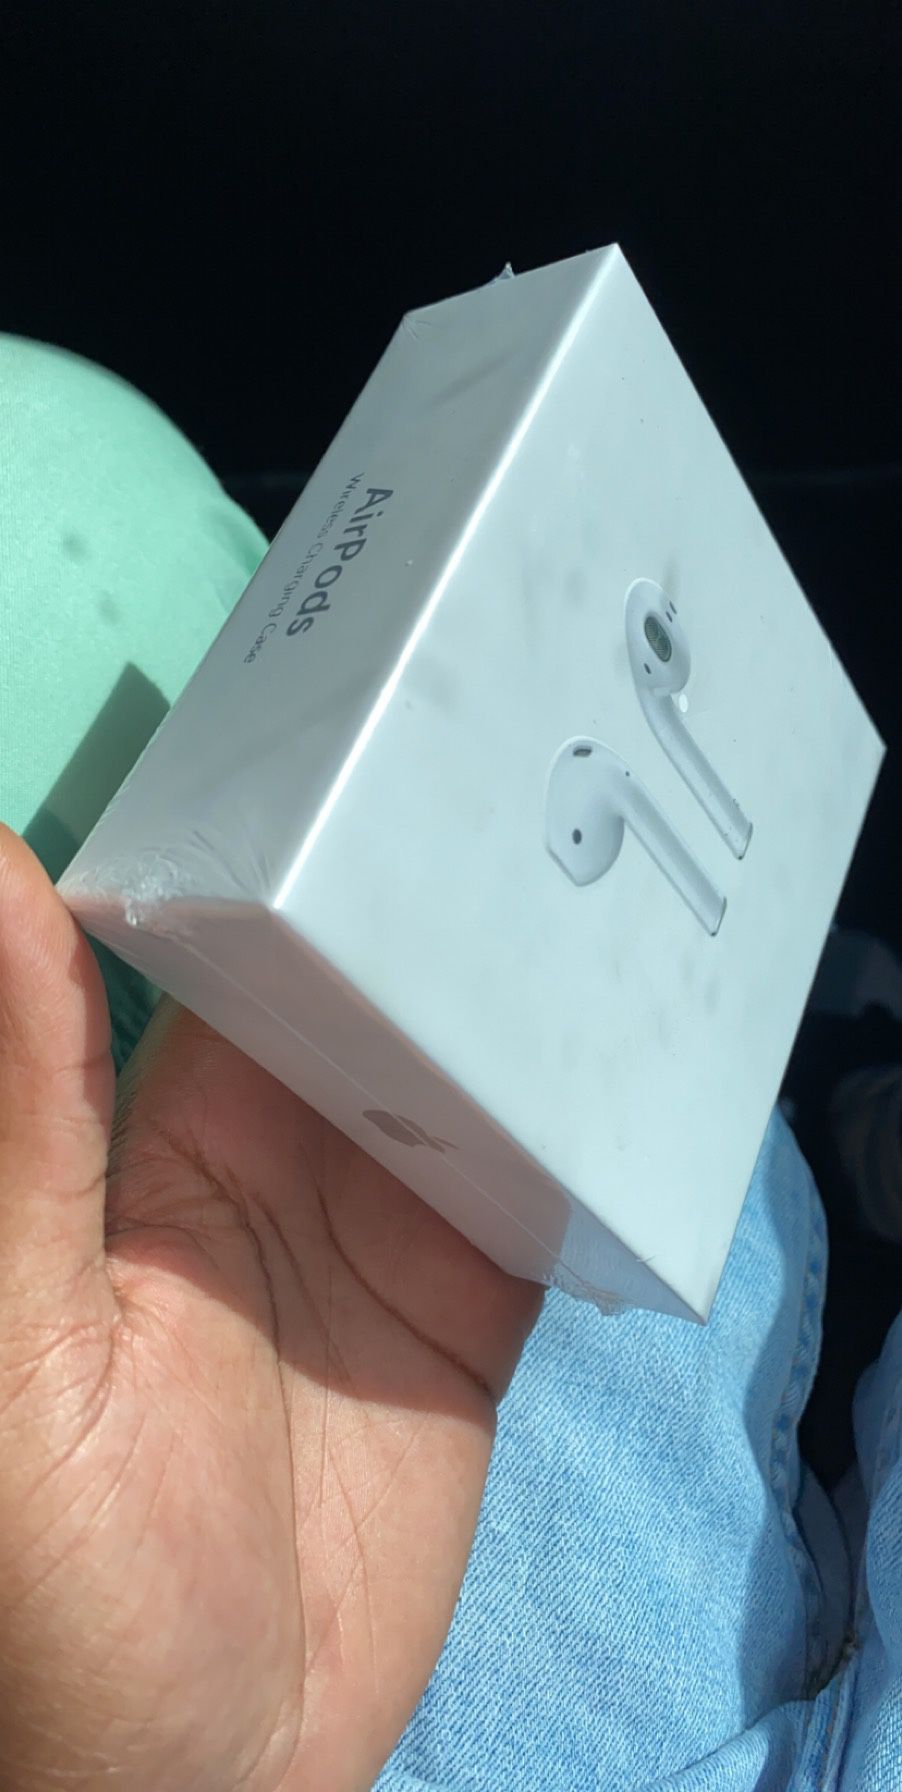 Genuine Apple Airpods 2nd gen with original charging case and USB unopened box